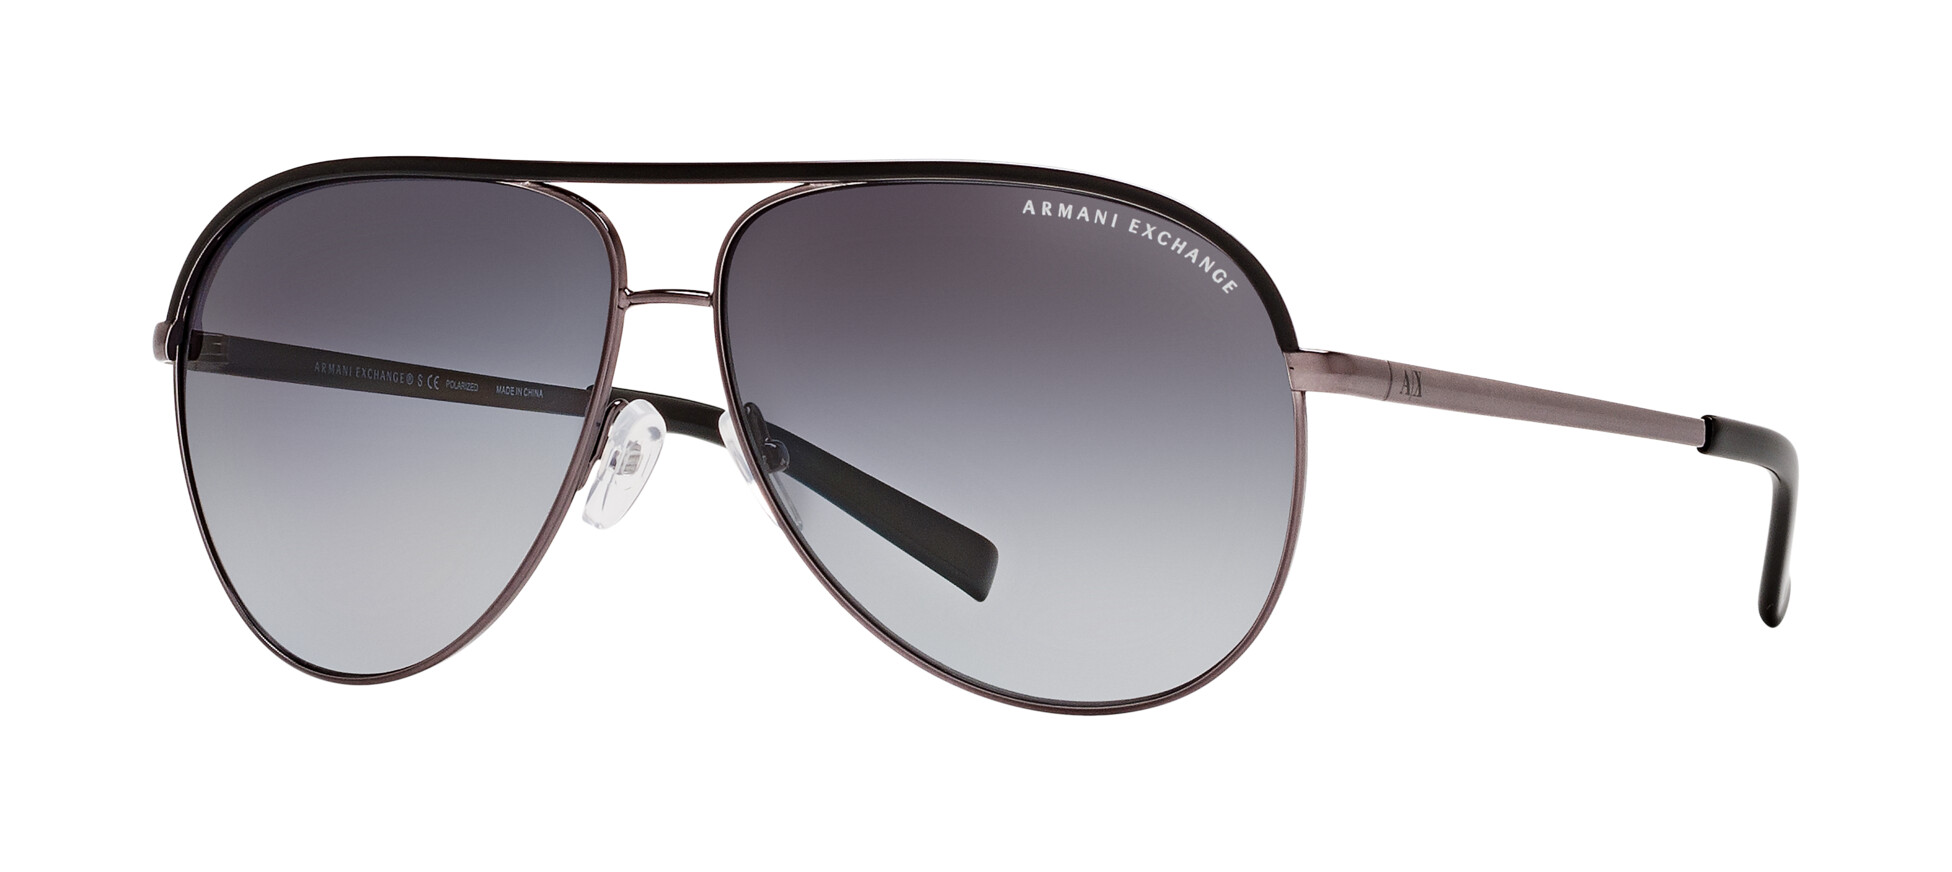 [products.image.angle_left01] Armani Exchange 0AX2002 6006T3 Sonnenbrille